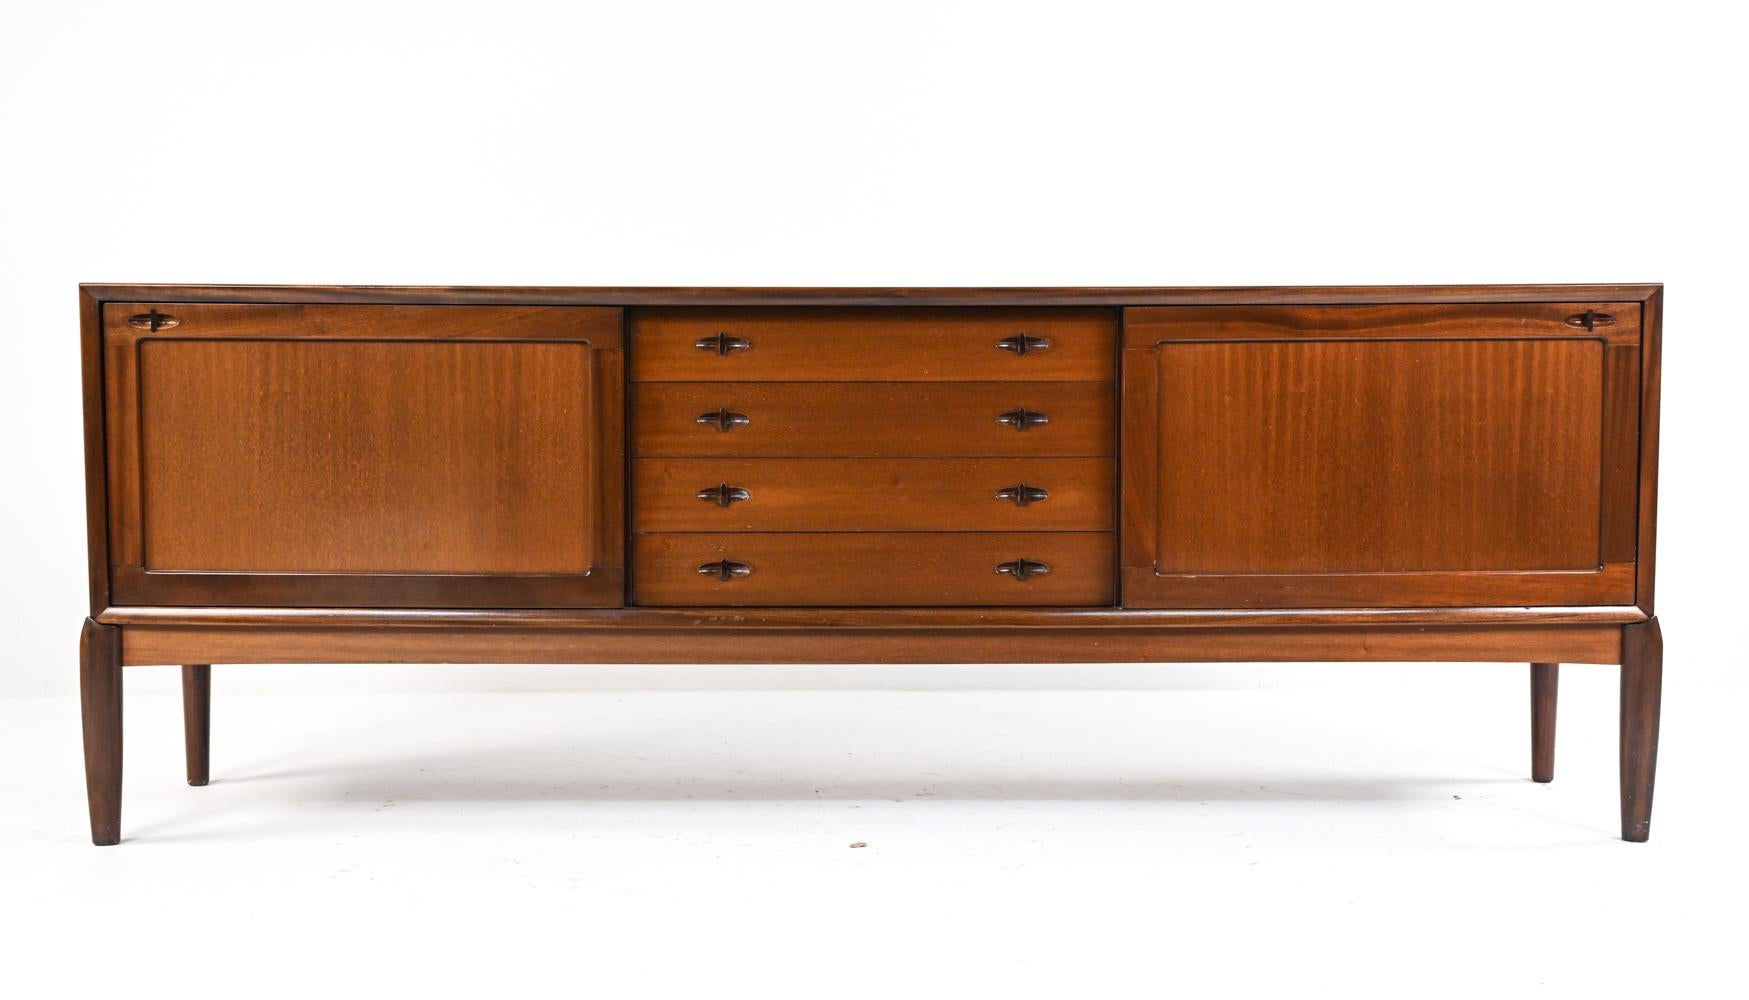 A beautiful and rare sideboard or credenza in fine mahogany veneer, with sculptural drawer handles and sliding doors. Designed by H.W. Klein for Bramin, c. 1950's.